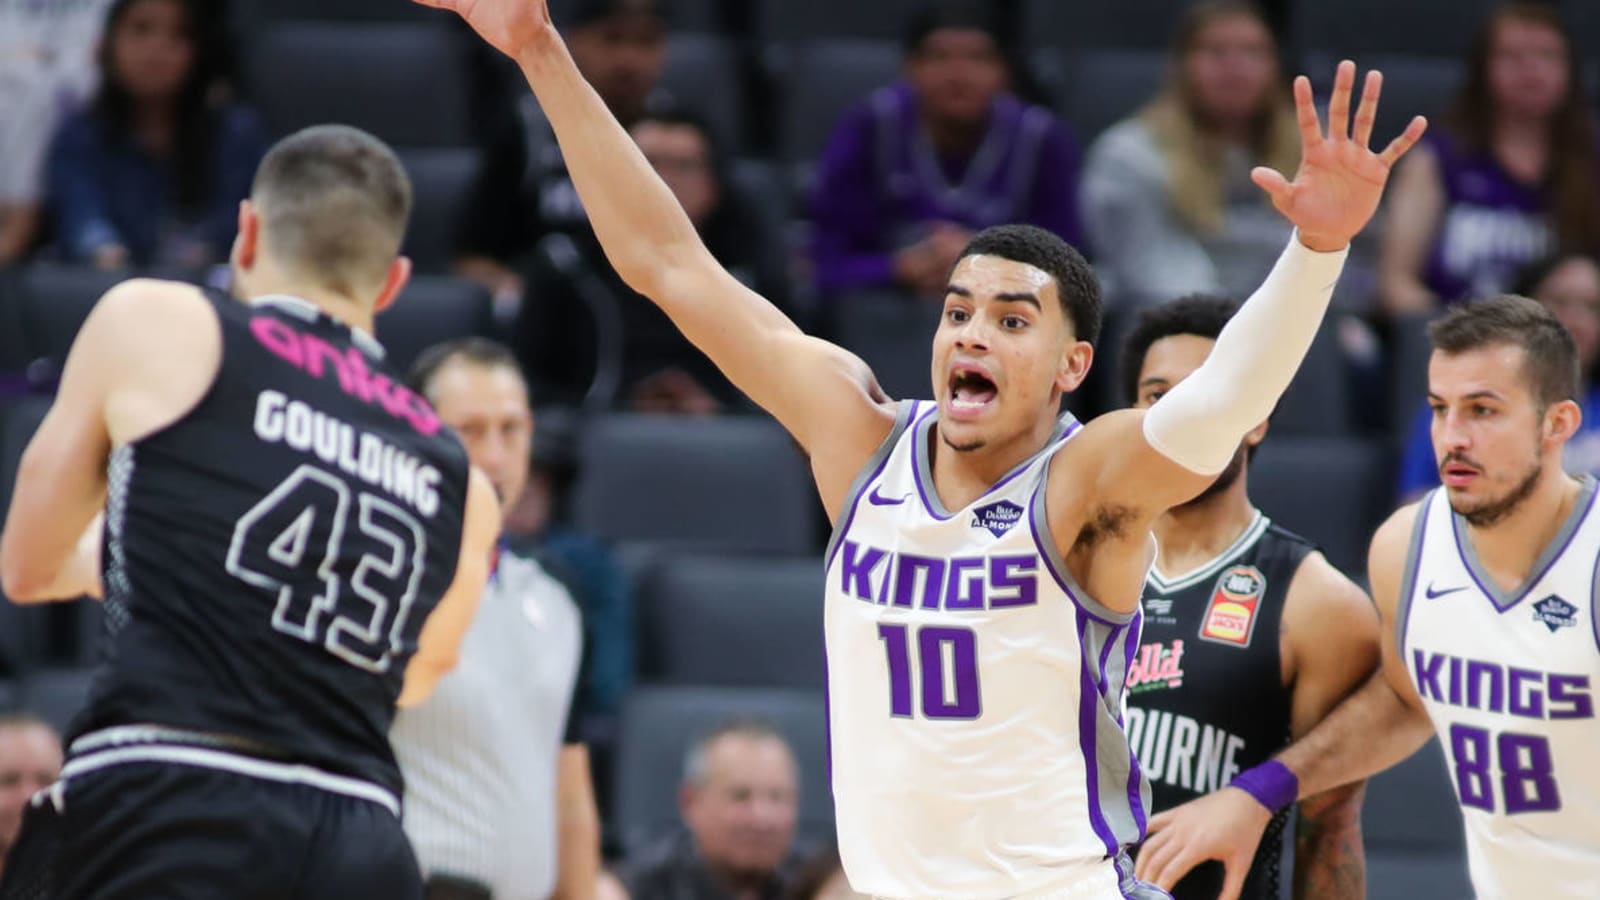 Kings guard Justin James had his first significant play of the season